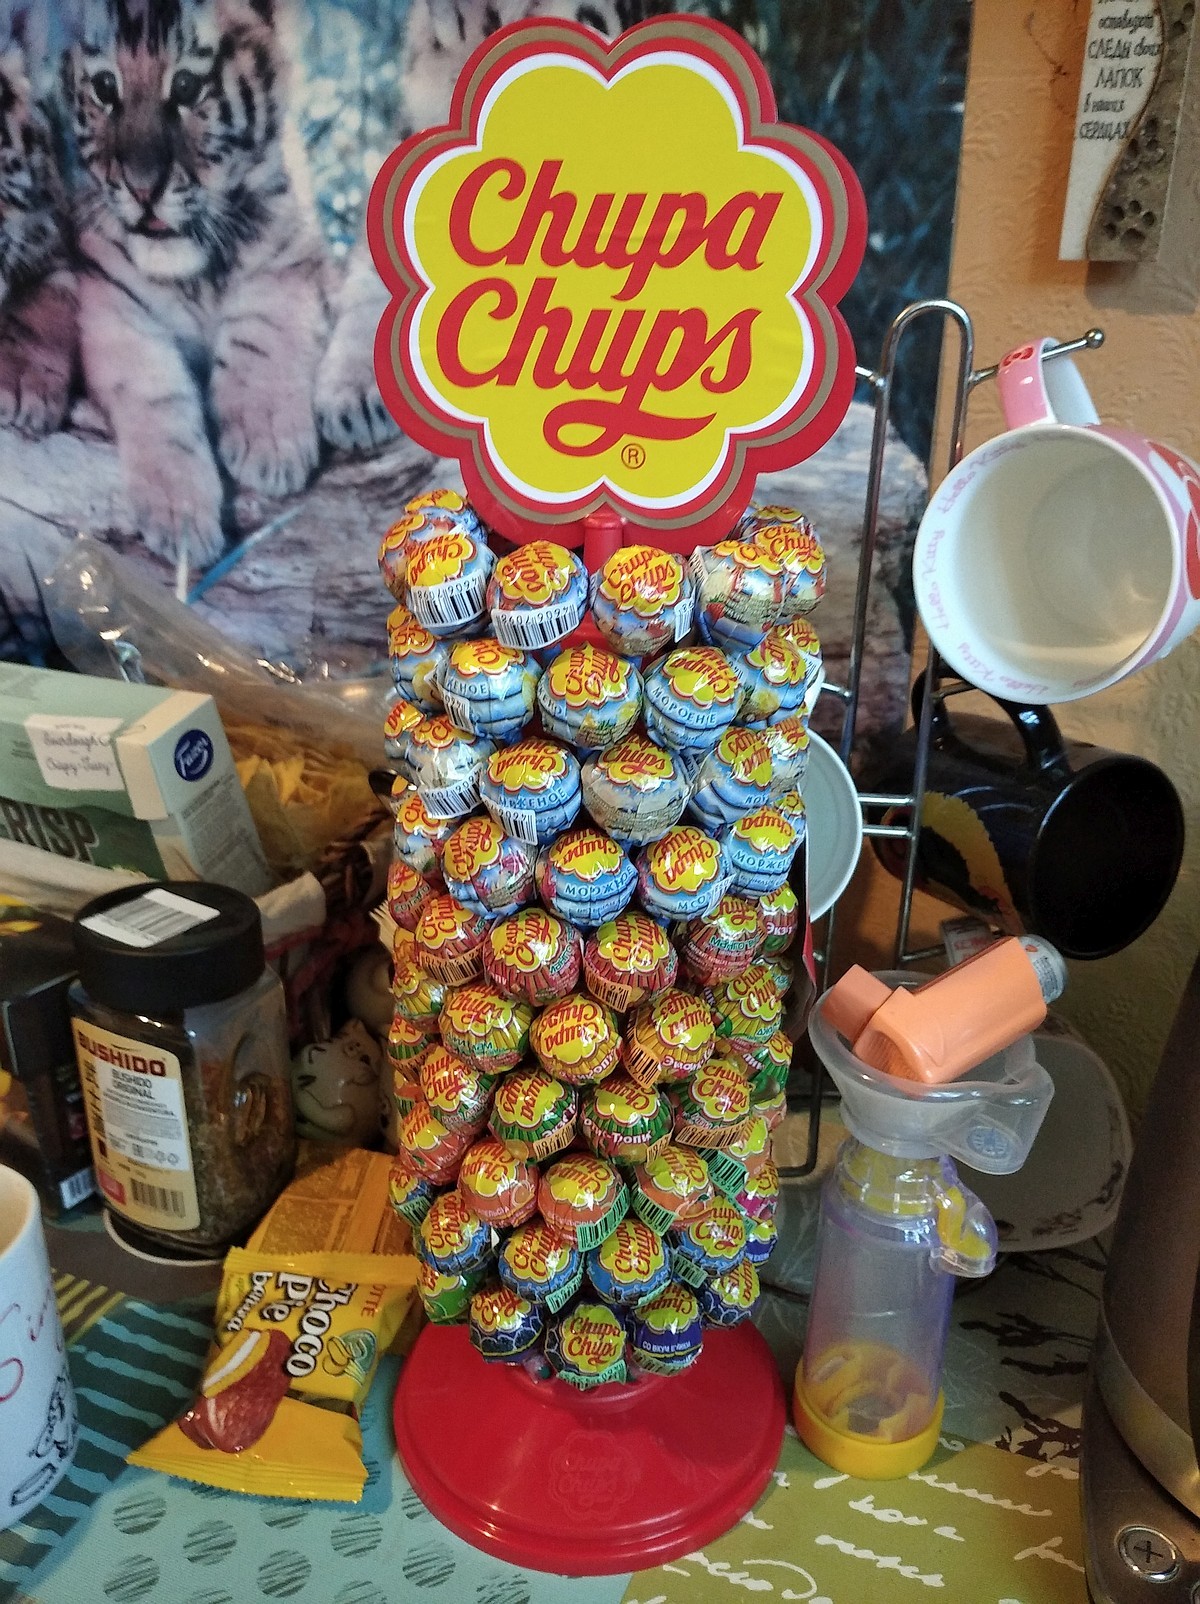 Chupa chups candy. Чупа Чупс 90-е. Чупа Чупс пикабу. Игрушка к Чупа-чупсу в 90-е. Ламповые 90е.